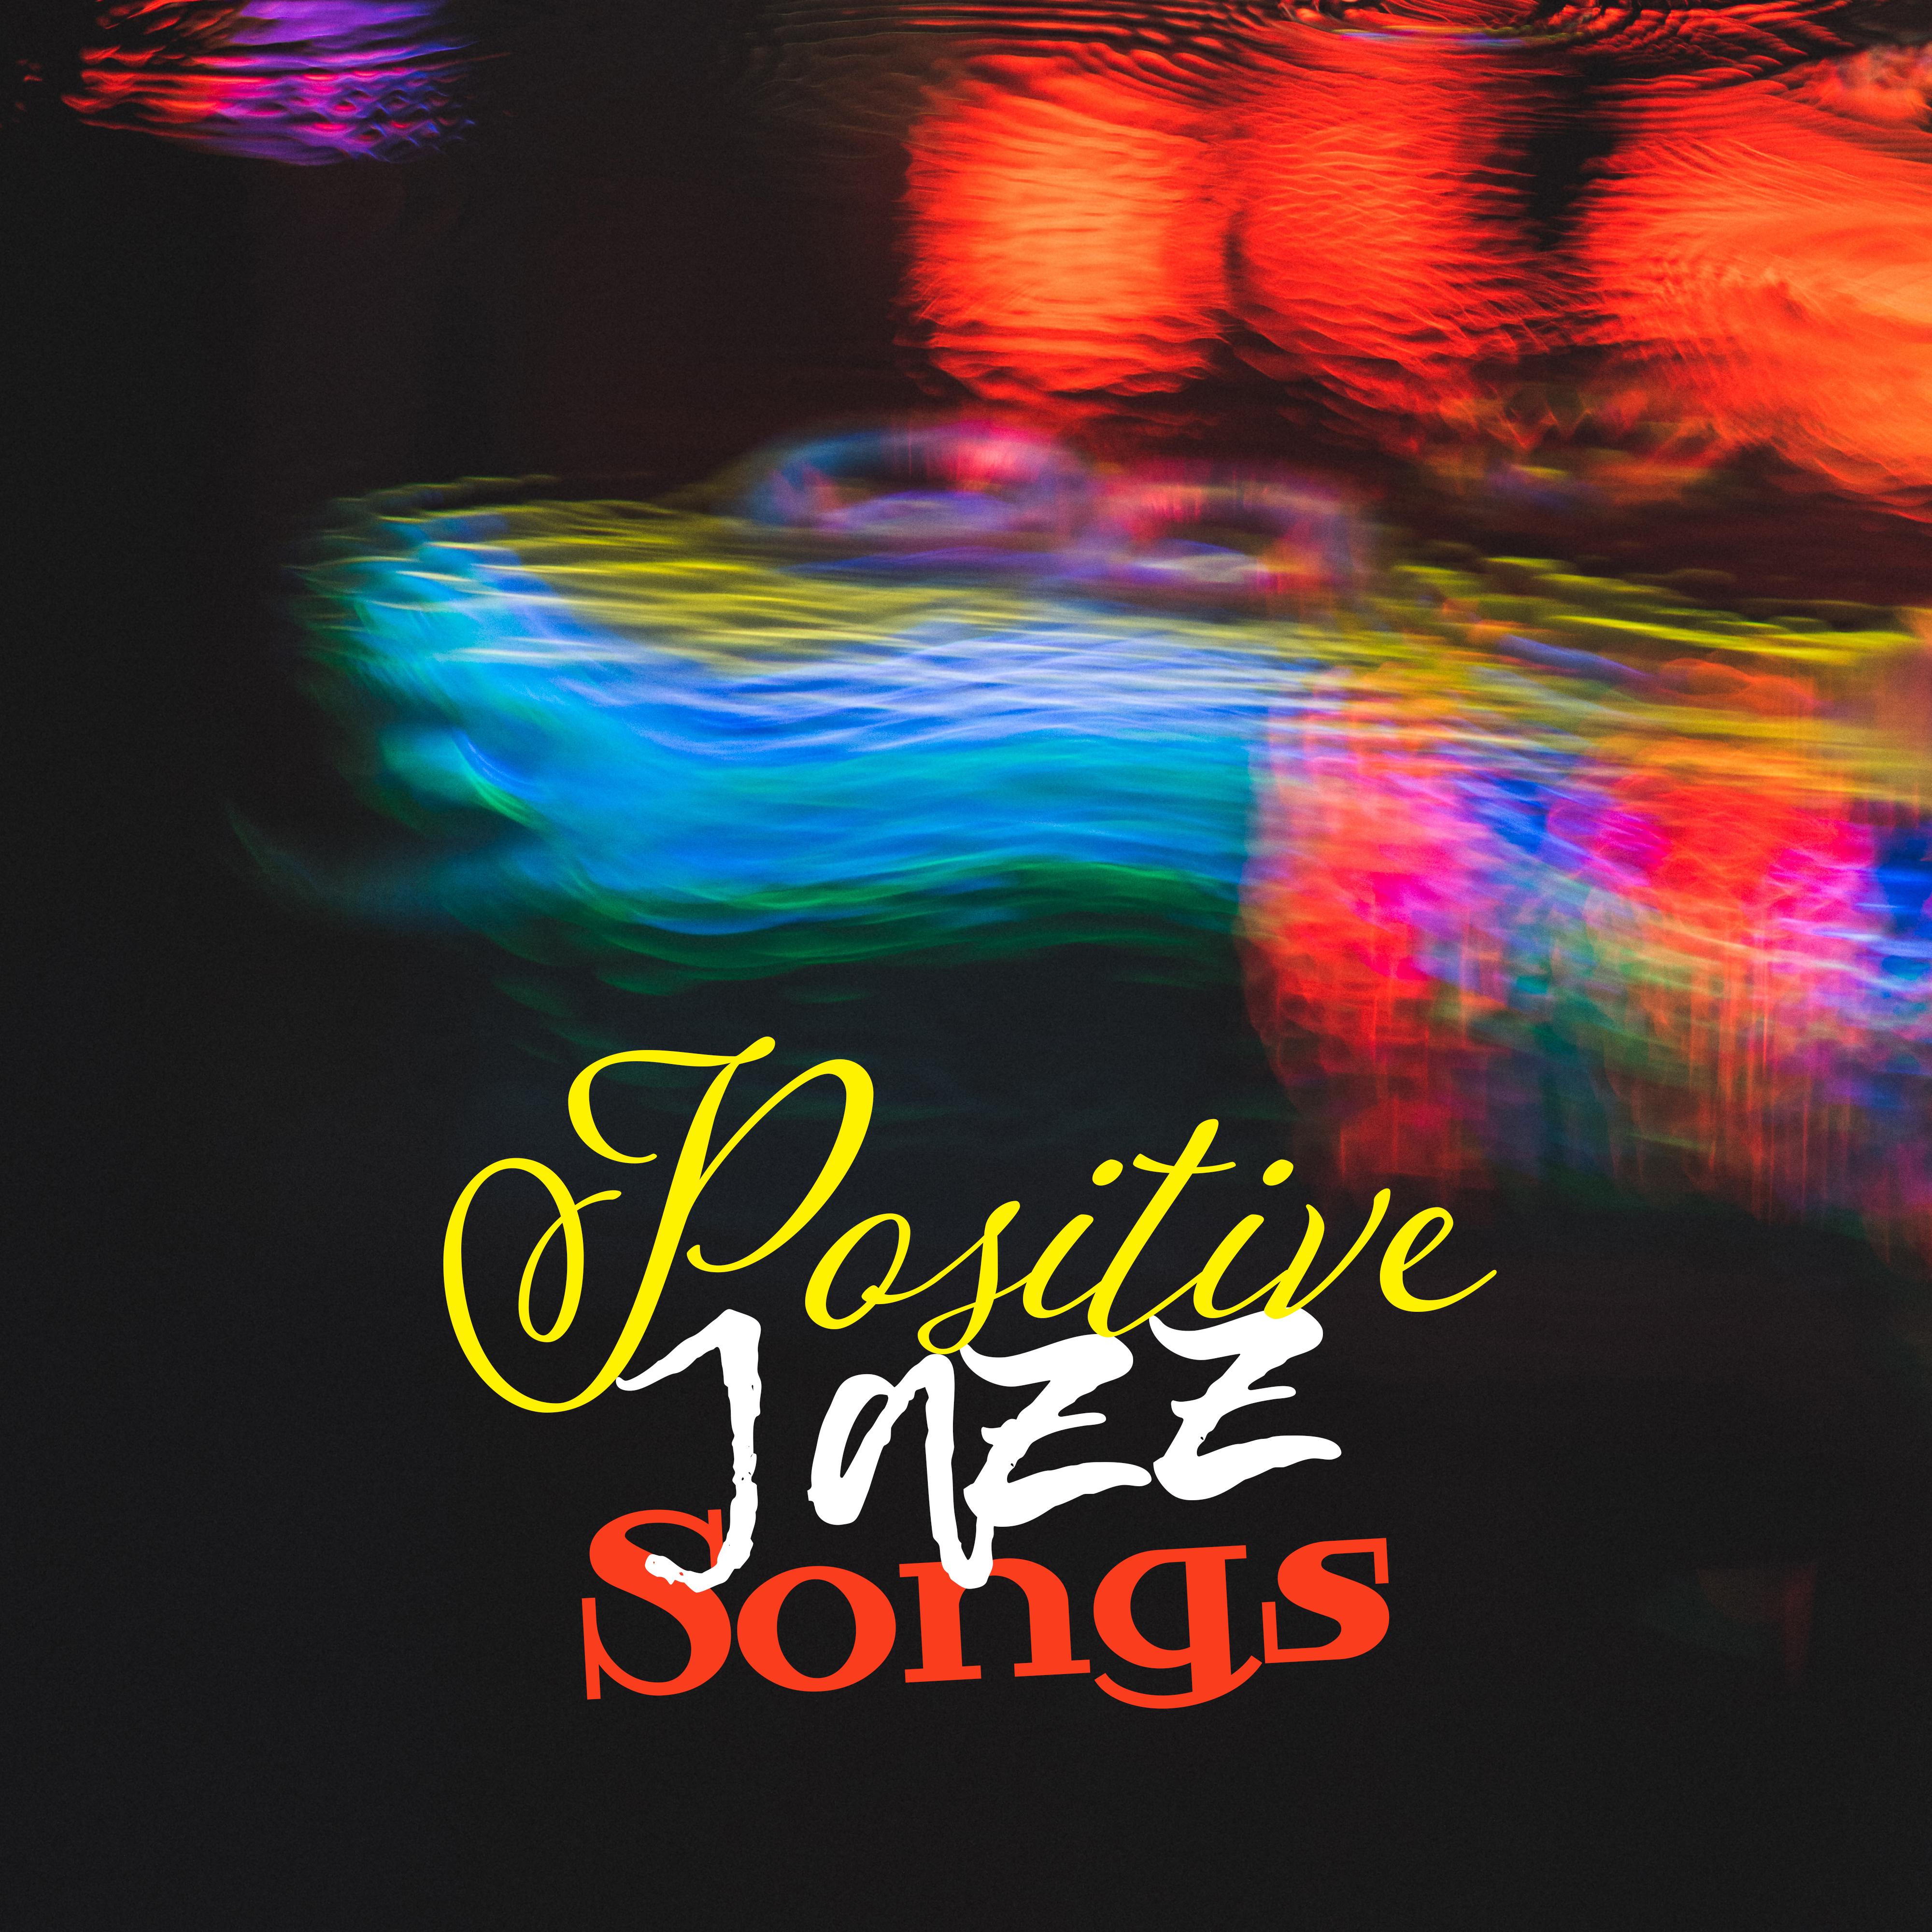 Positive Jazz Songs  Relaxing Jazz, Instrumental Music, Ambient, Jazz Lounge 2017